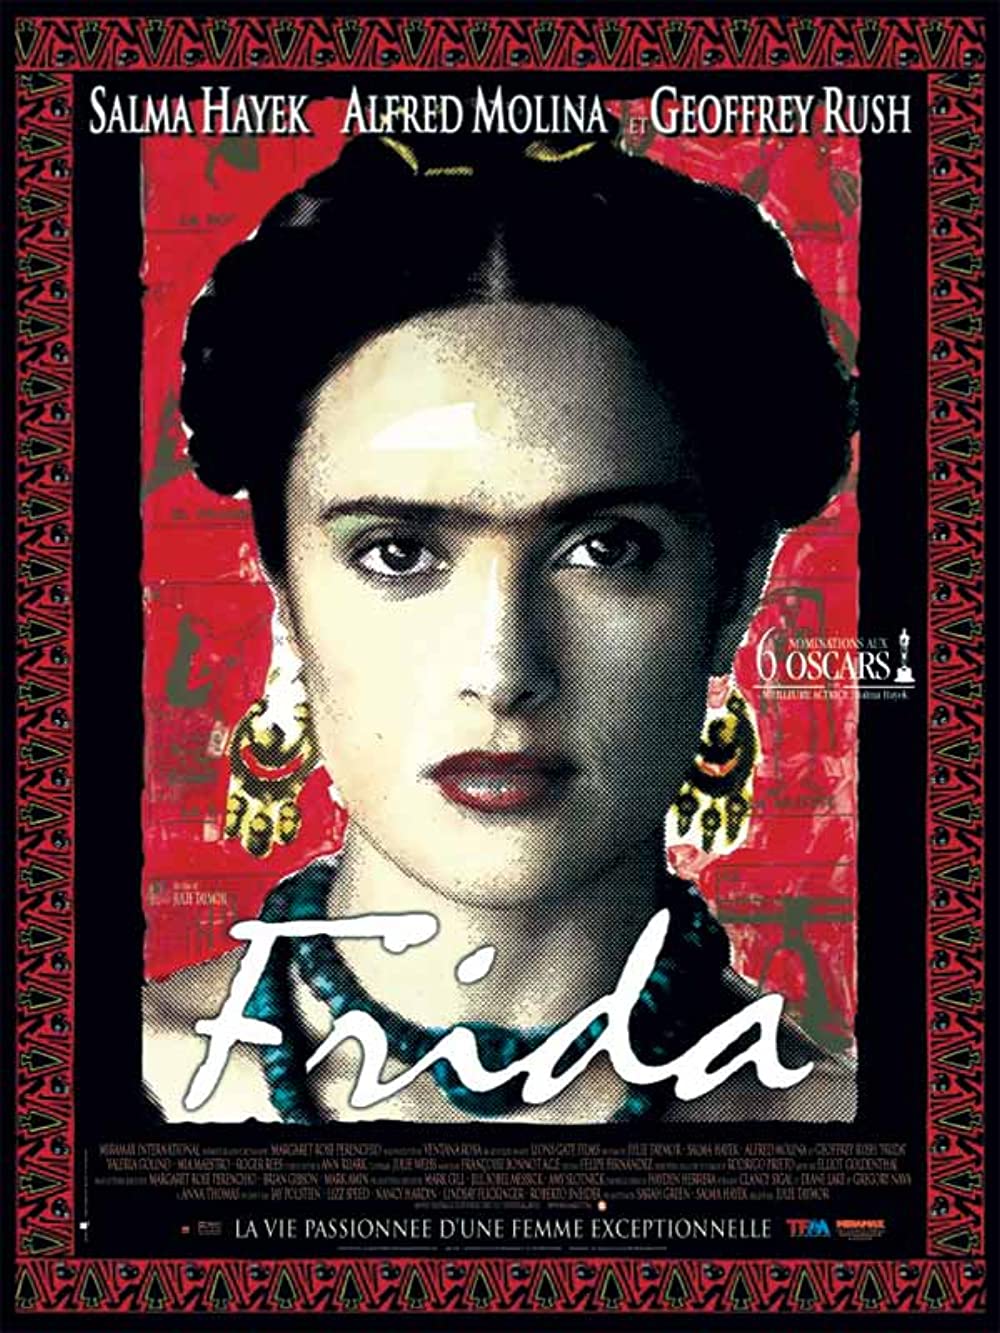 Biopic of the bold and controversial life of artist Frida Kahlo. Set in Mexico City, this visually evocative film traces her lifelong, tempestuous relationship with her mentor, along with her illicit affairs with Trotsky and various women.